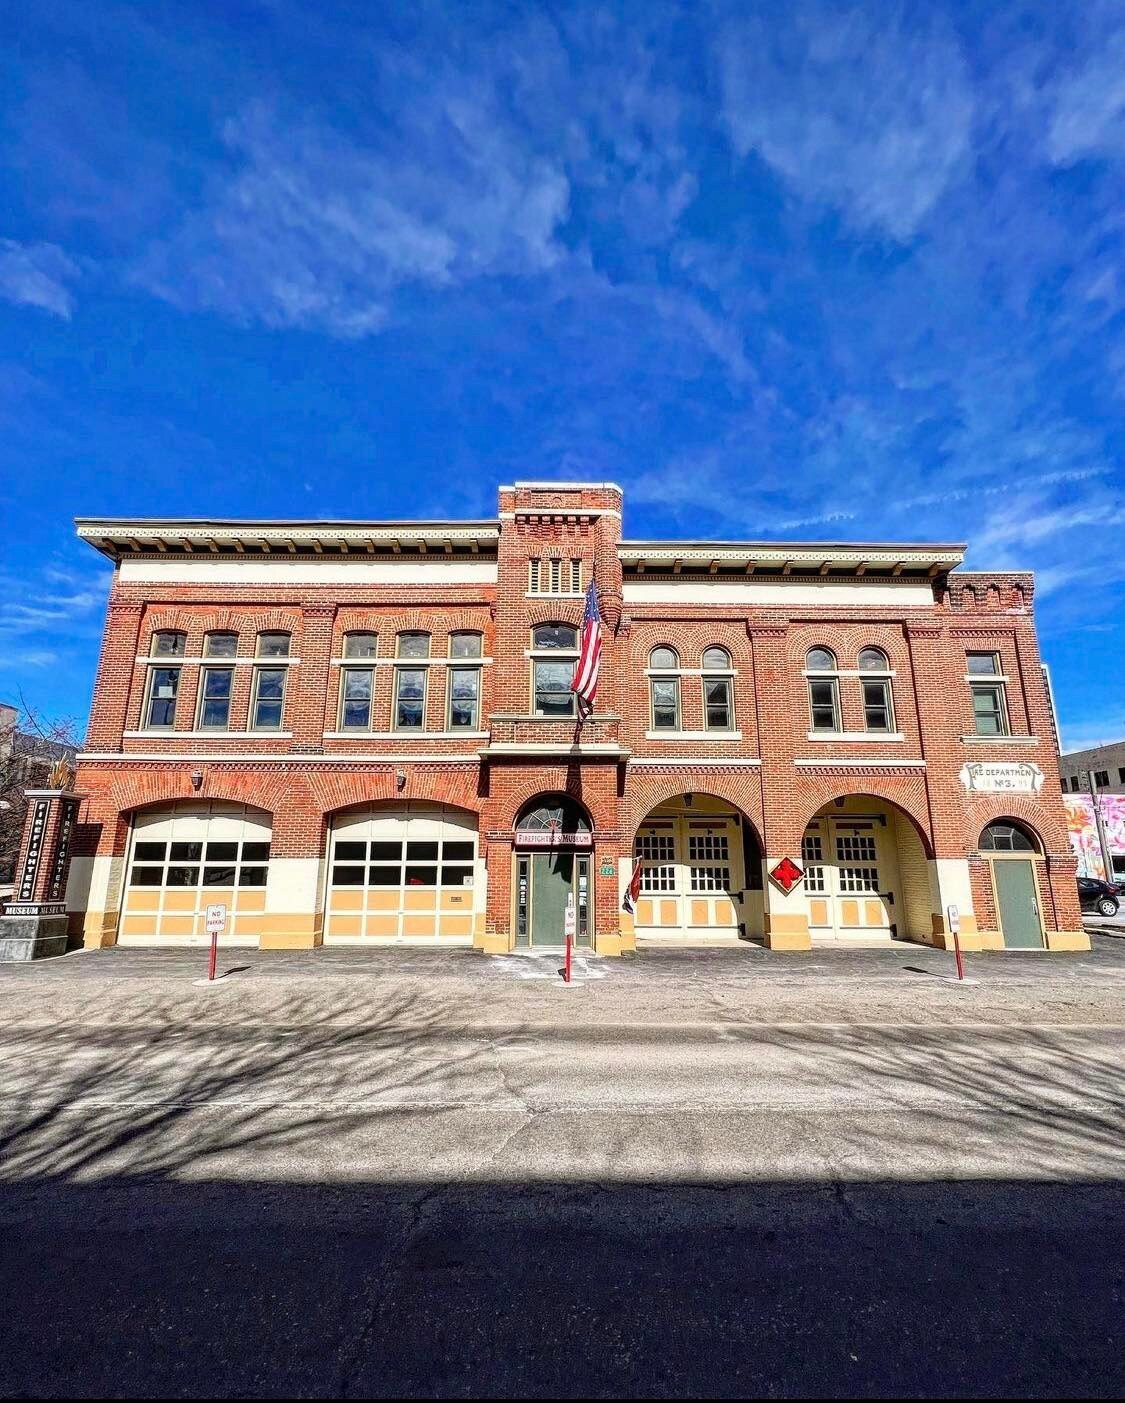 The exterior of the Fort Wayne Firefighters Museum.